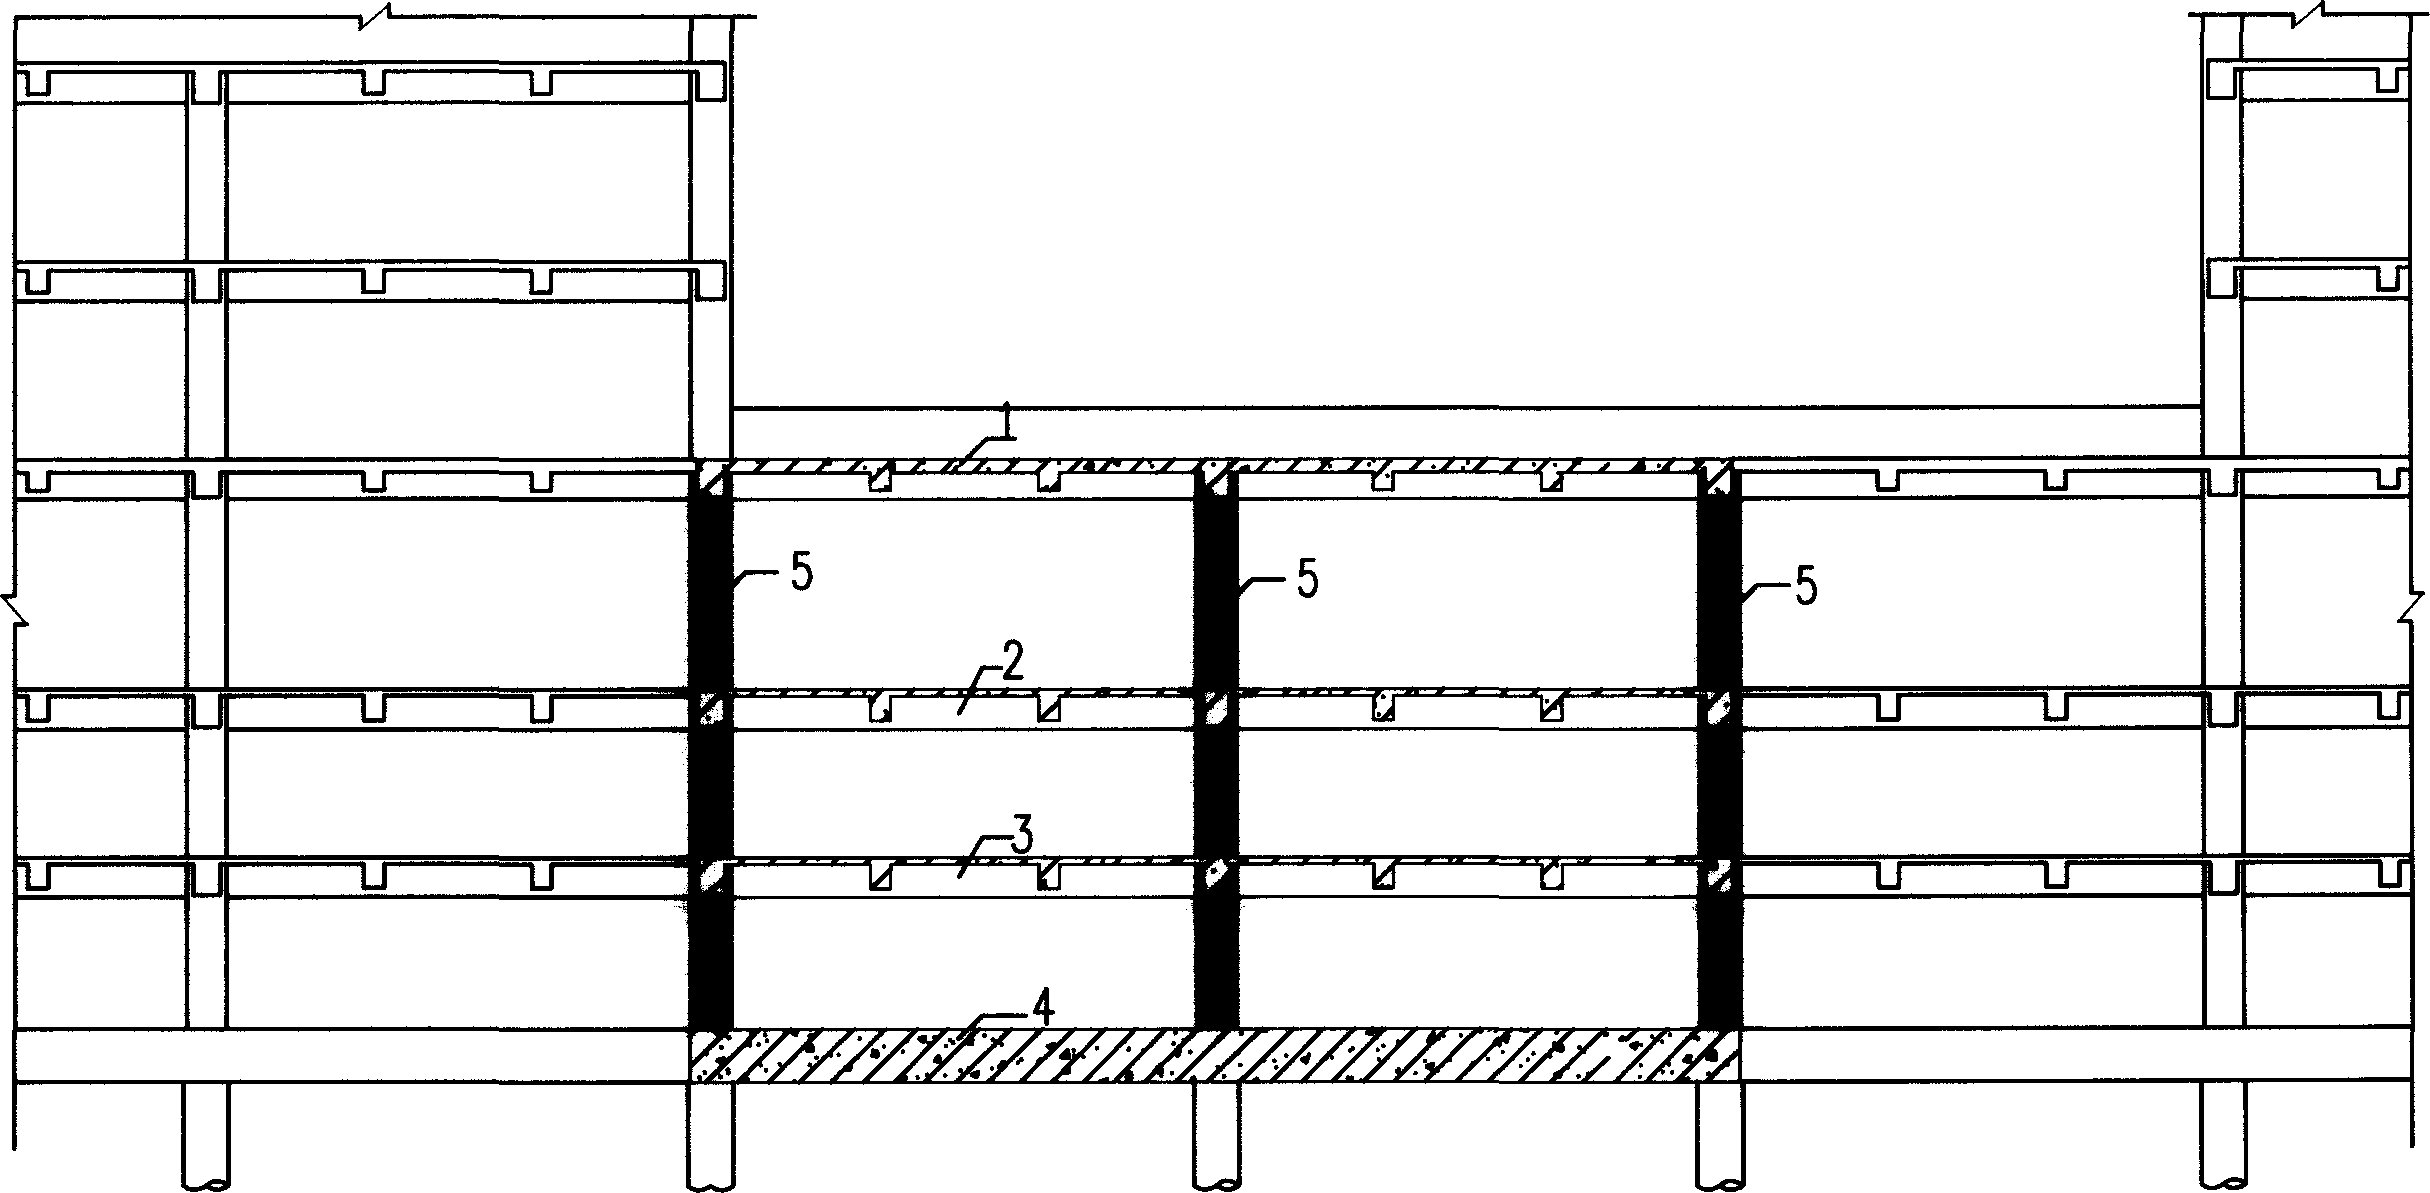 Construction method of reconstrating existant underground space into subway station